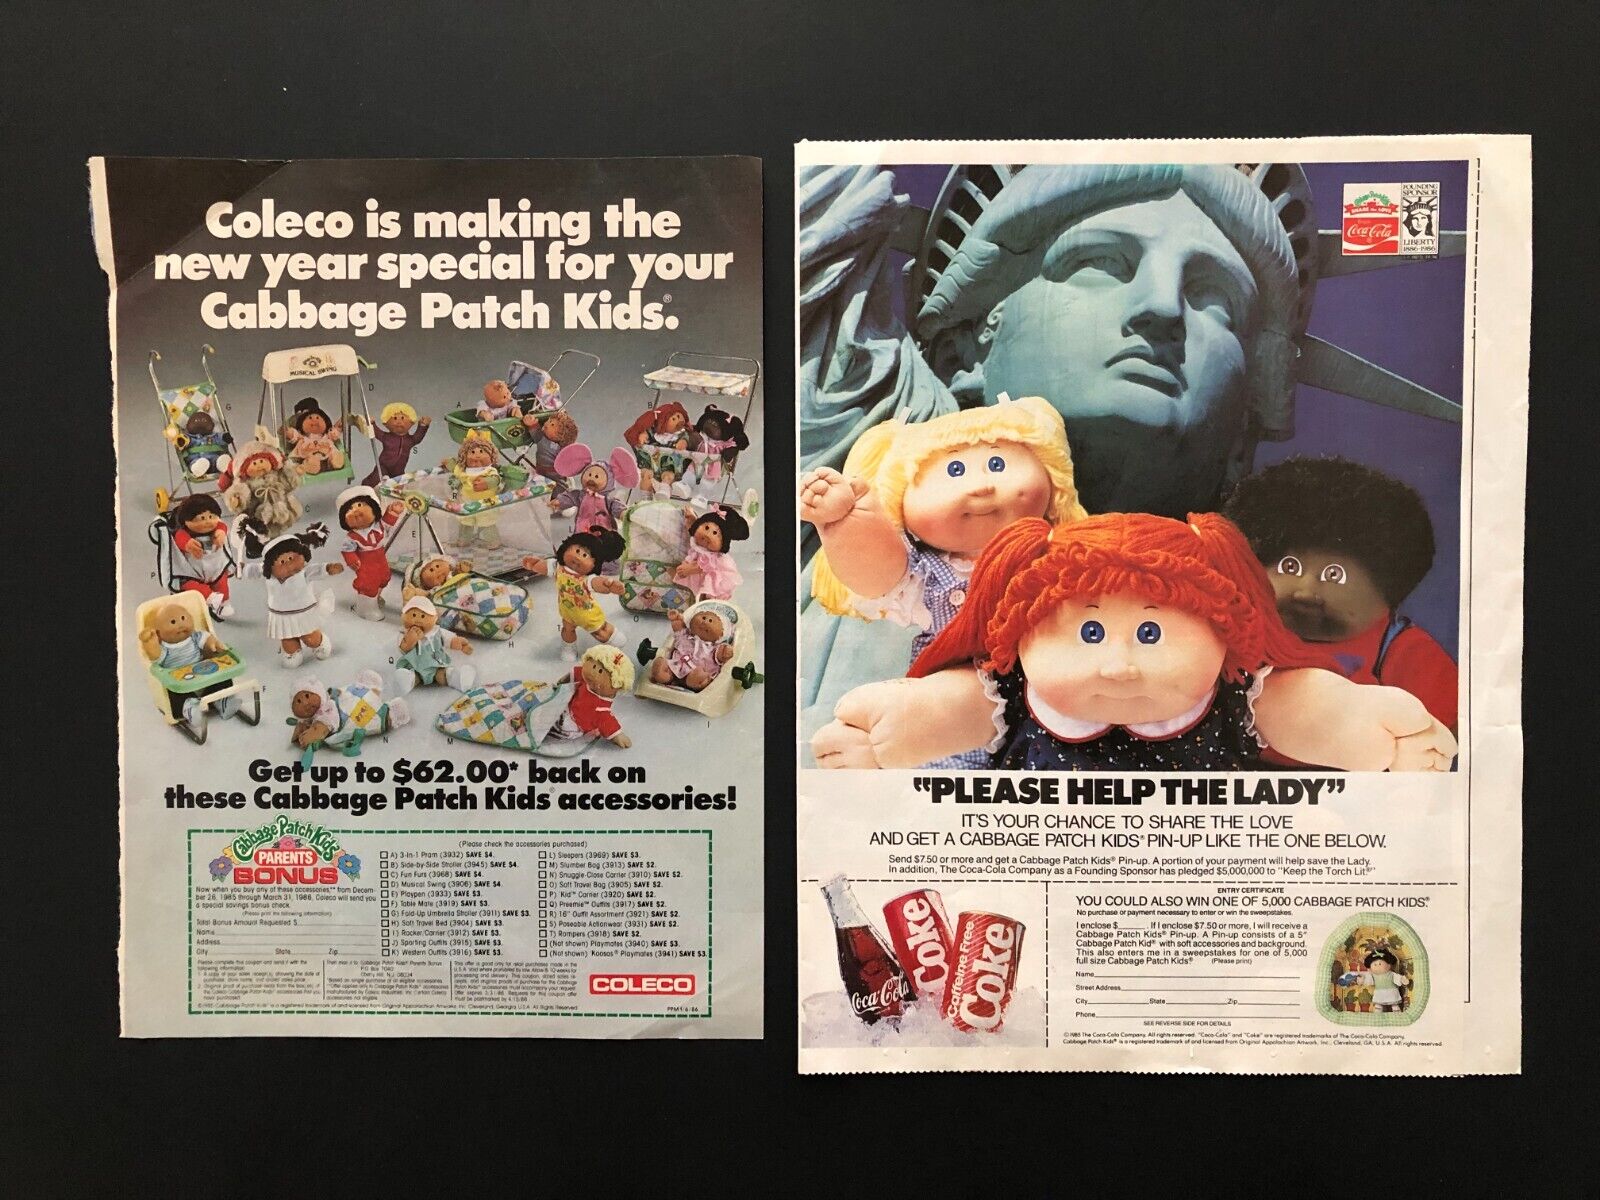 Vintage 1985/86Coleco Cabbage Patch Kids Magazine Advertising Toy Ads - Lot of 2